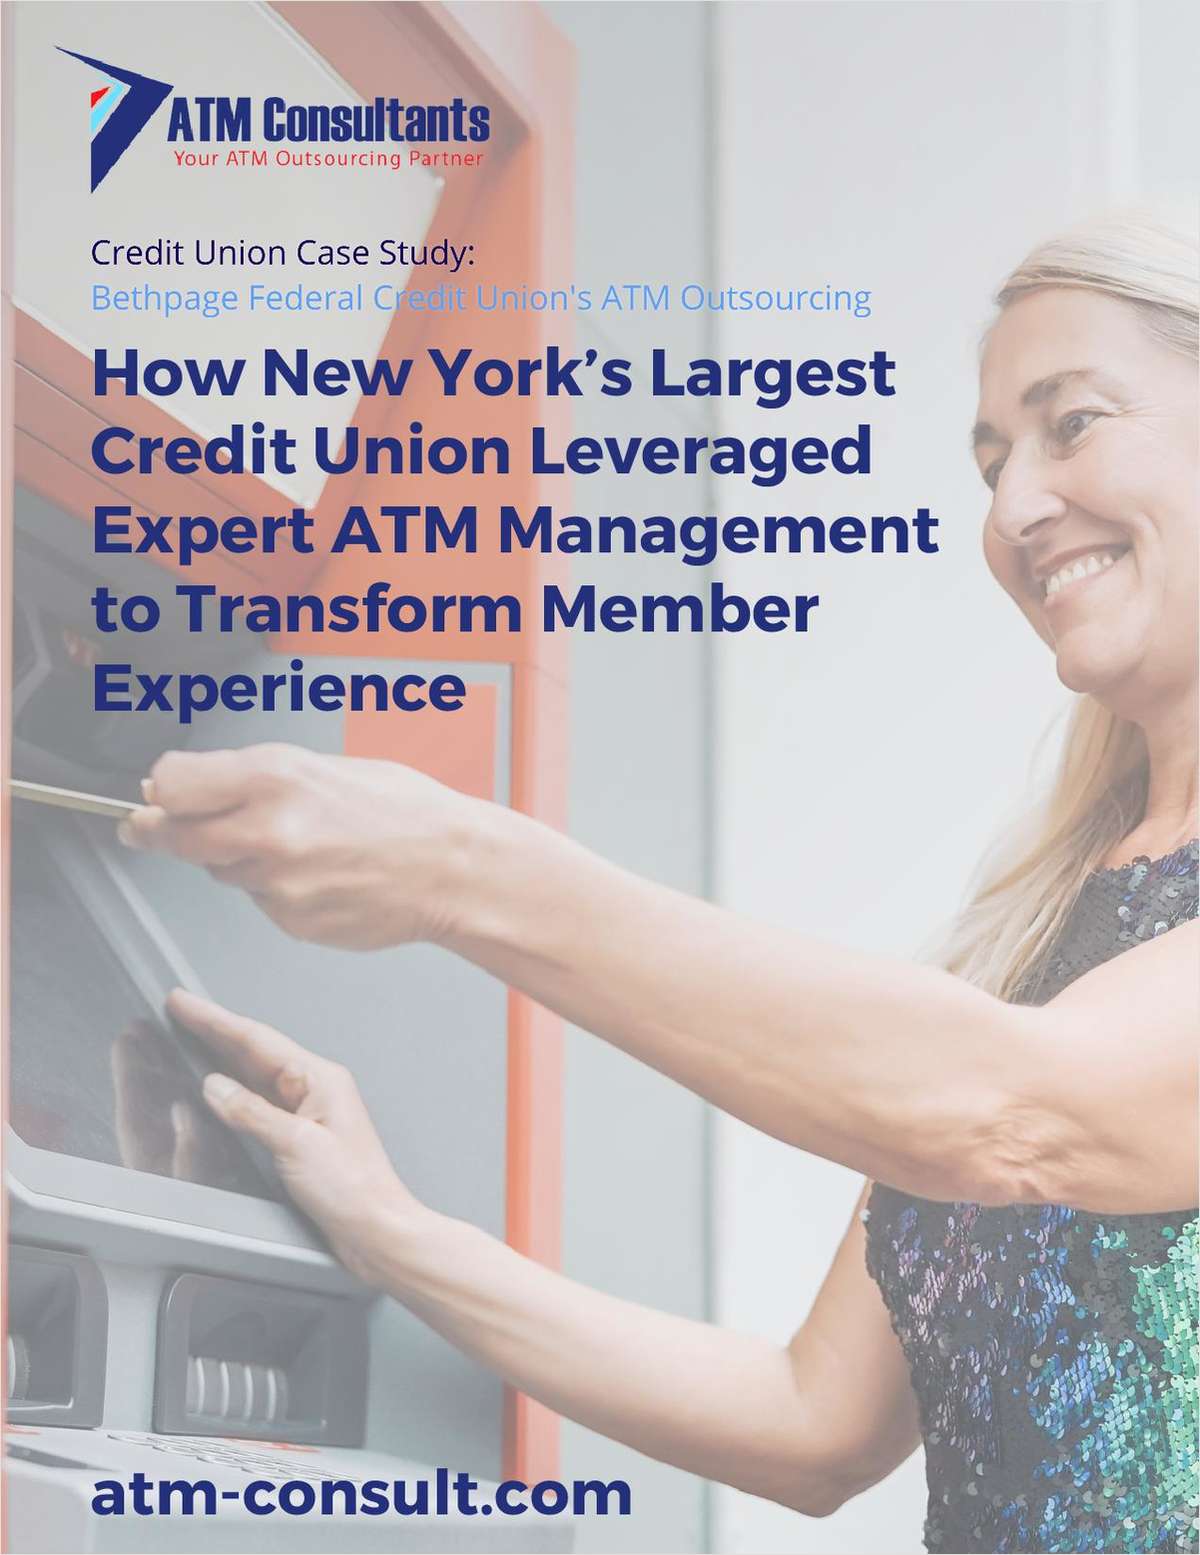 How New York's Largest Credit Union Leveraged Expert ATM Management to Transform Member Experience